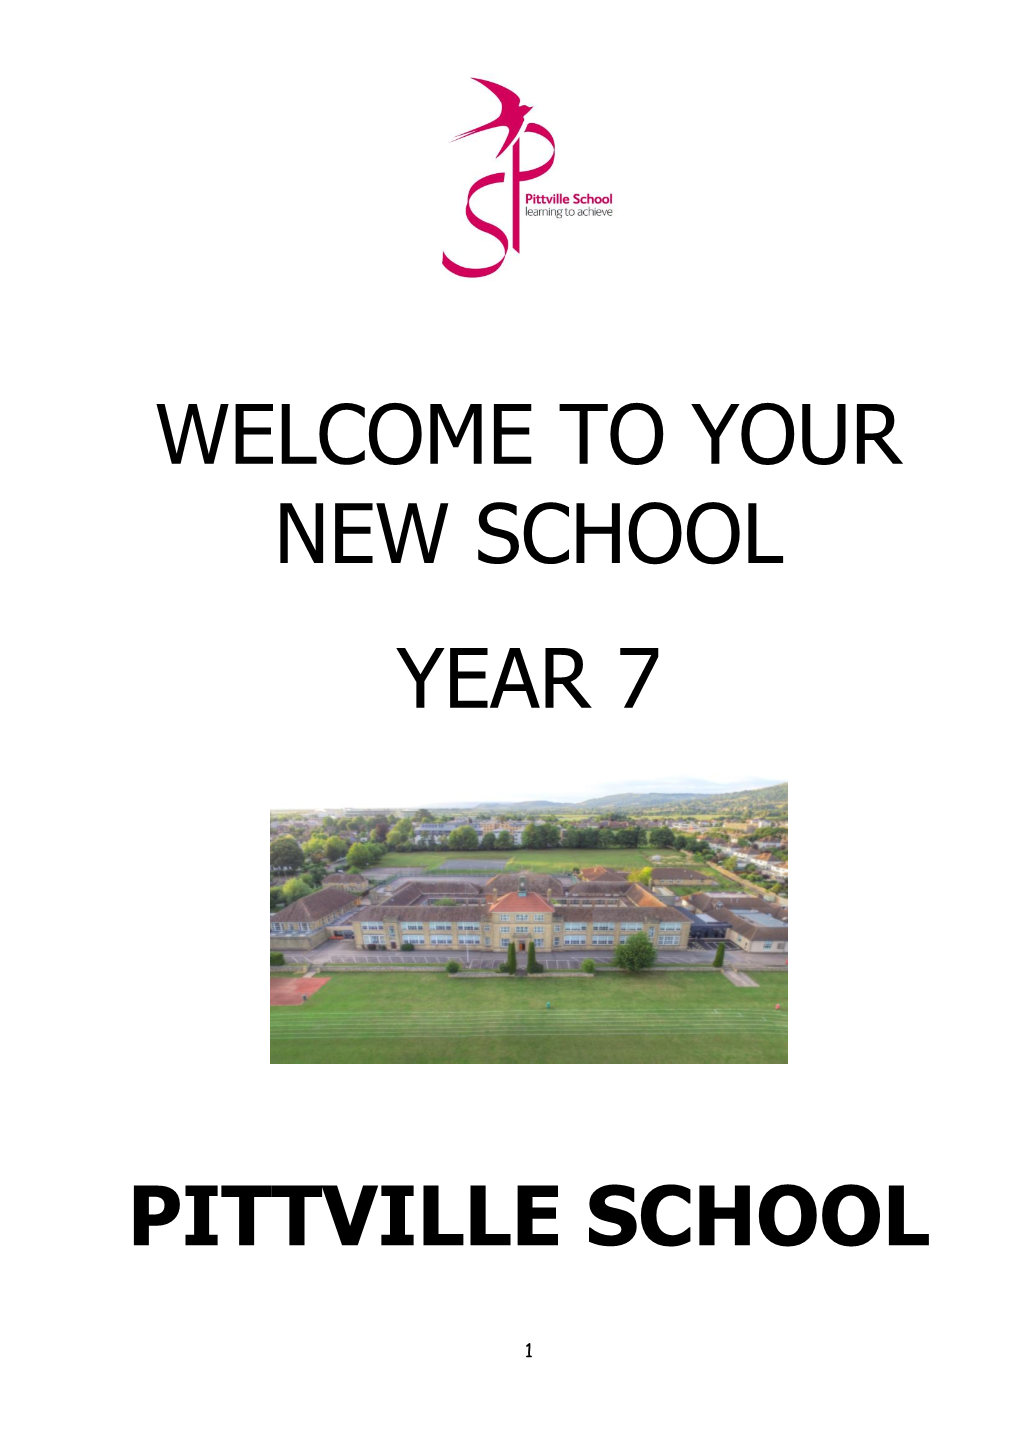 Welcome to Your New School Year 7 Pittville School